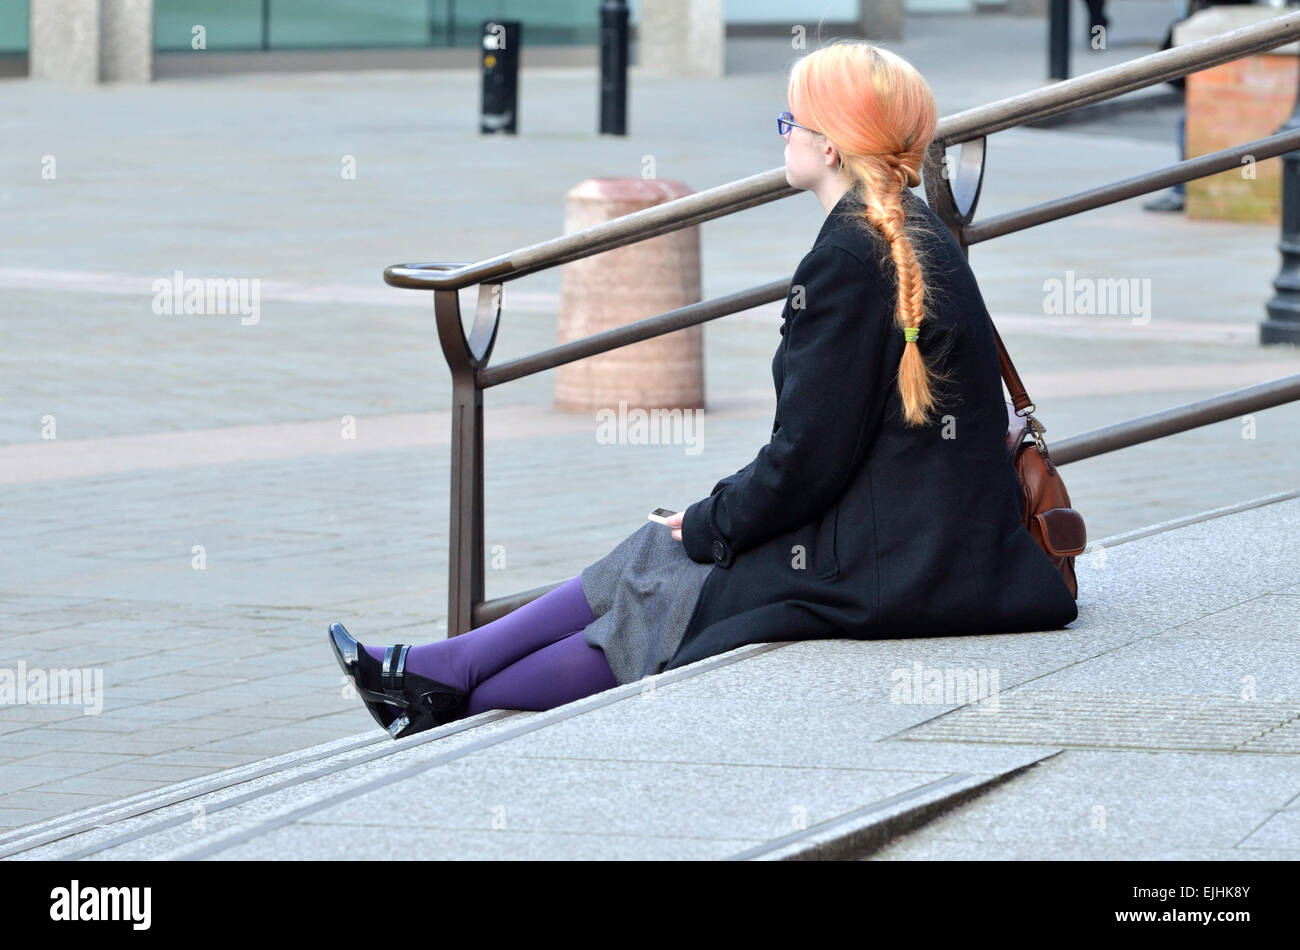 London, England, UK. Young woman with orange hair and purple tights sitting on the steps of Wesminster Cathedral Stock Photo